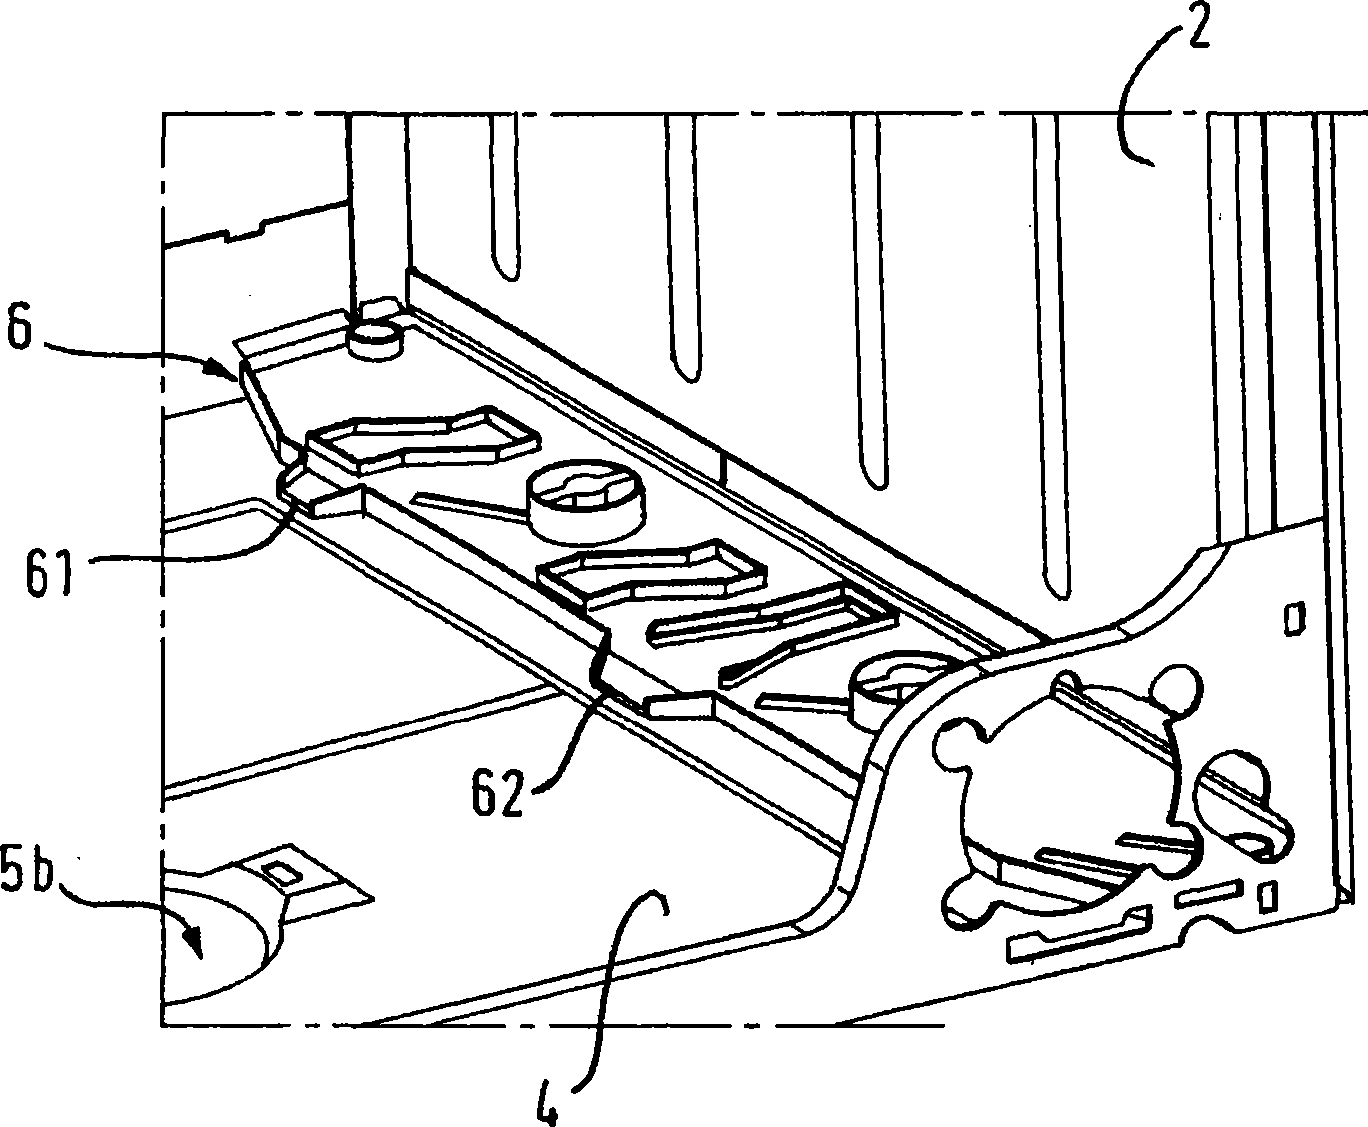 Household appliance having a collecting apparatus for leakage water